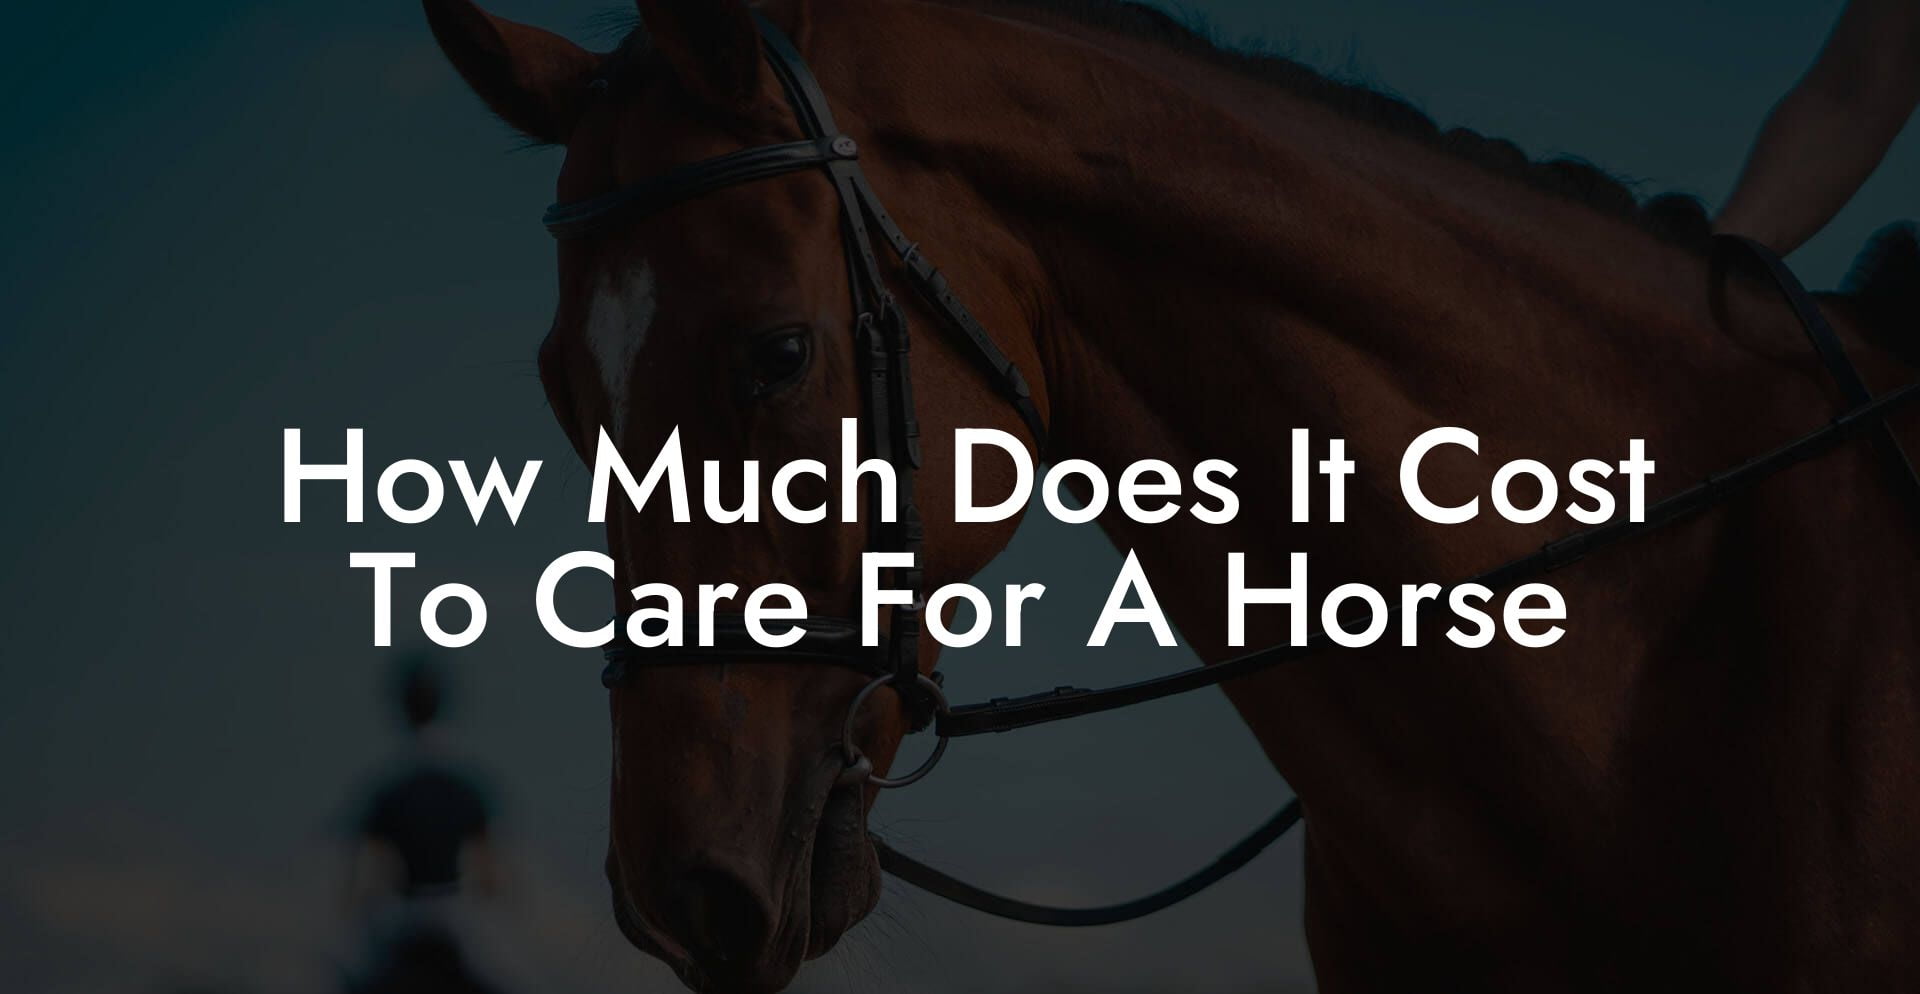 How Much Does It Cost To Care For A Horse